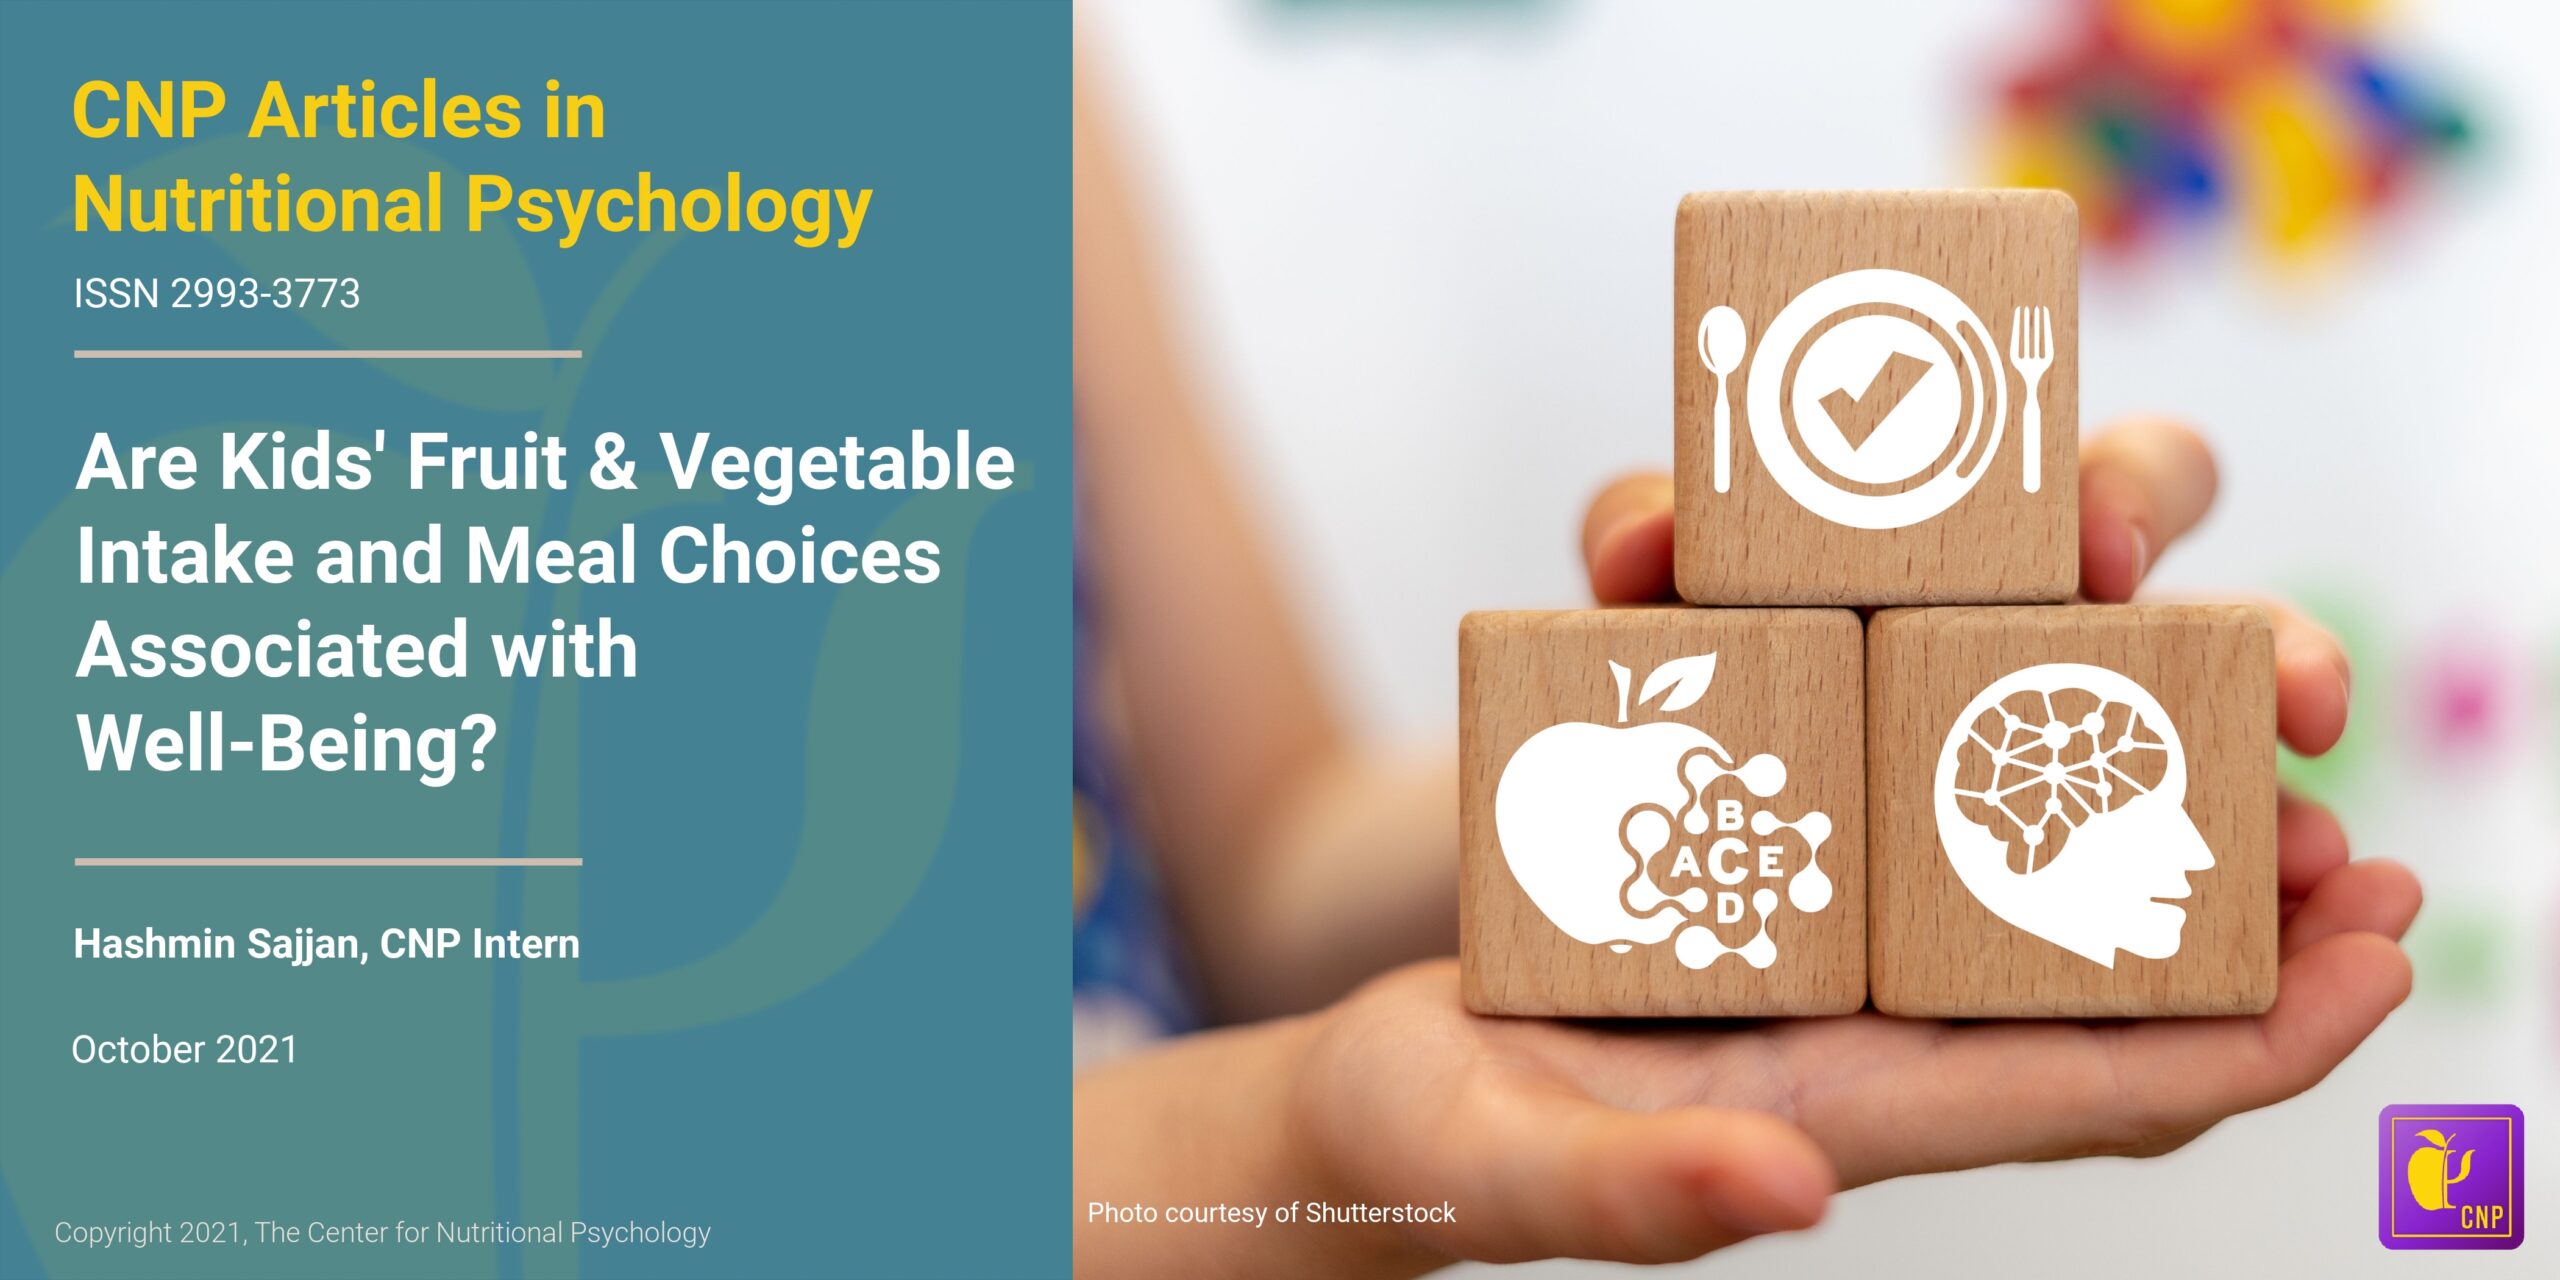 Are Kids’ Fruit and Vegetable Intake and Meal Choices Associated With Well-Being?